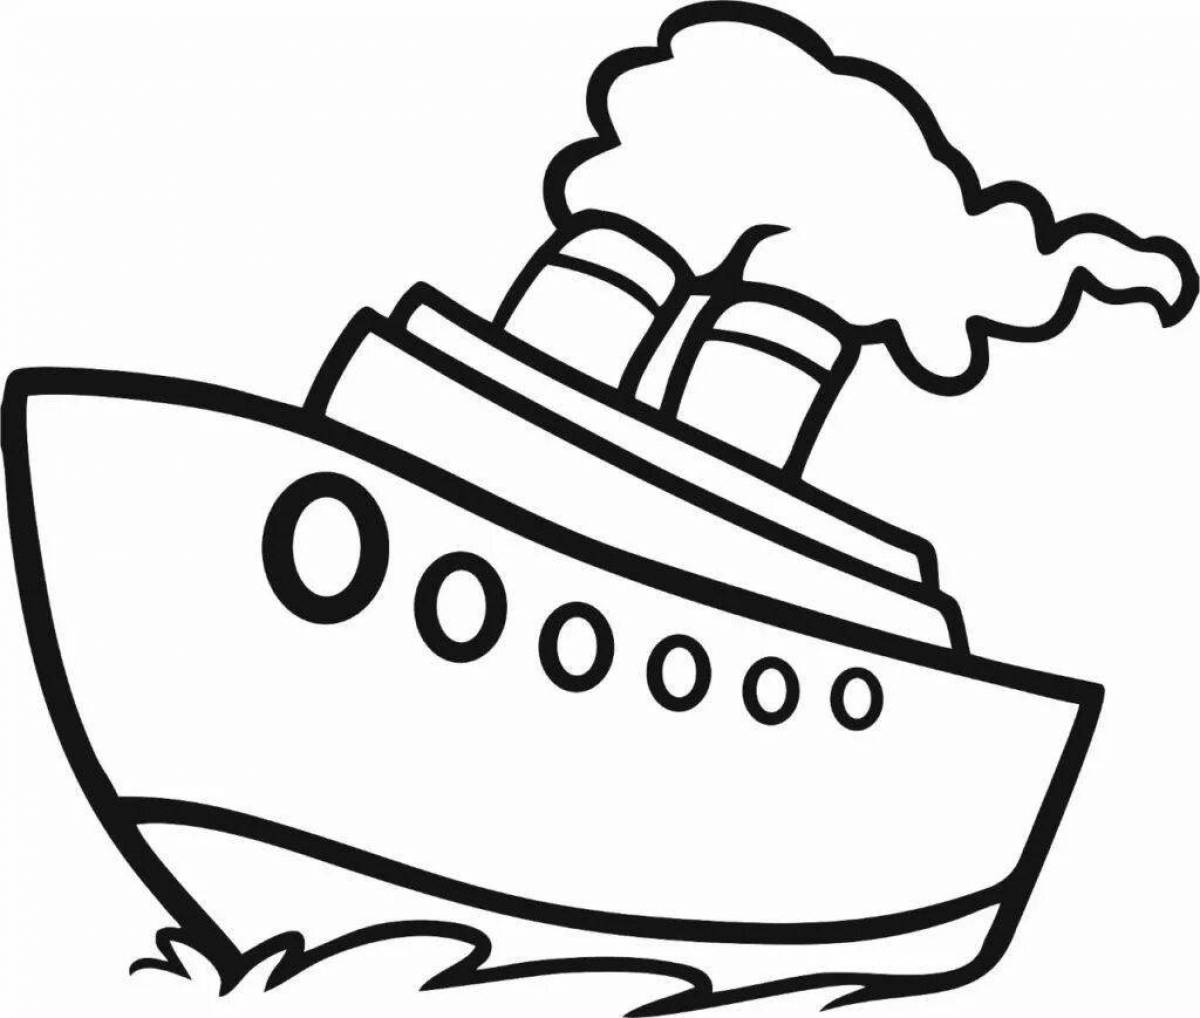 Famous steamship coloring page for 5-6 year olds